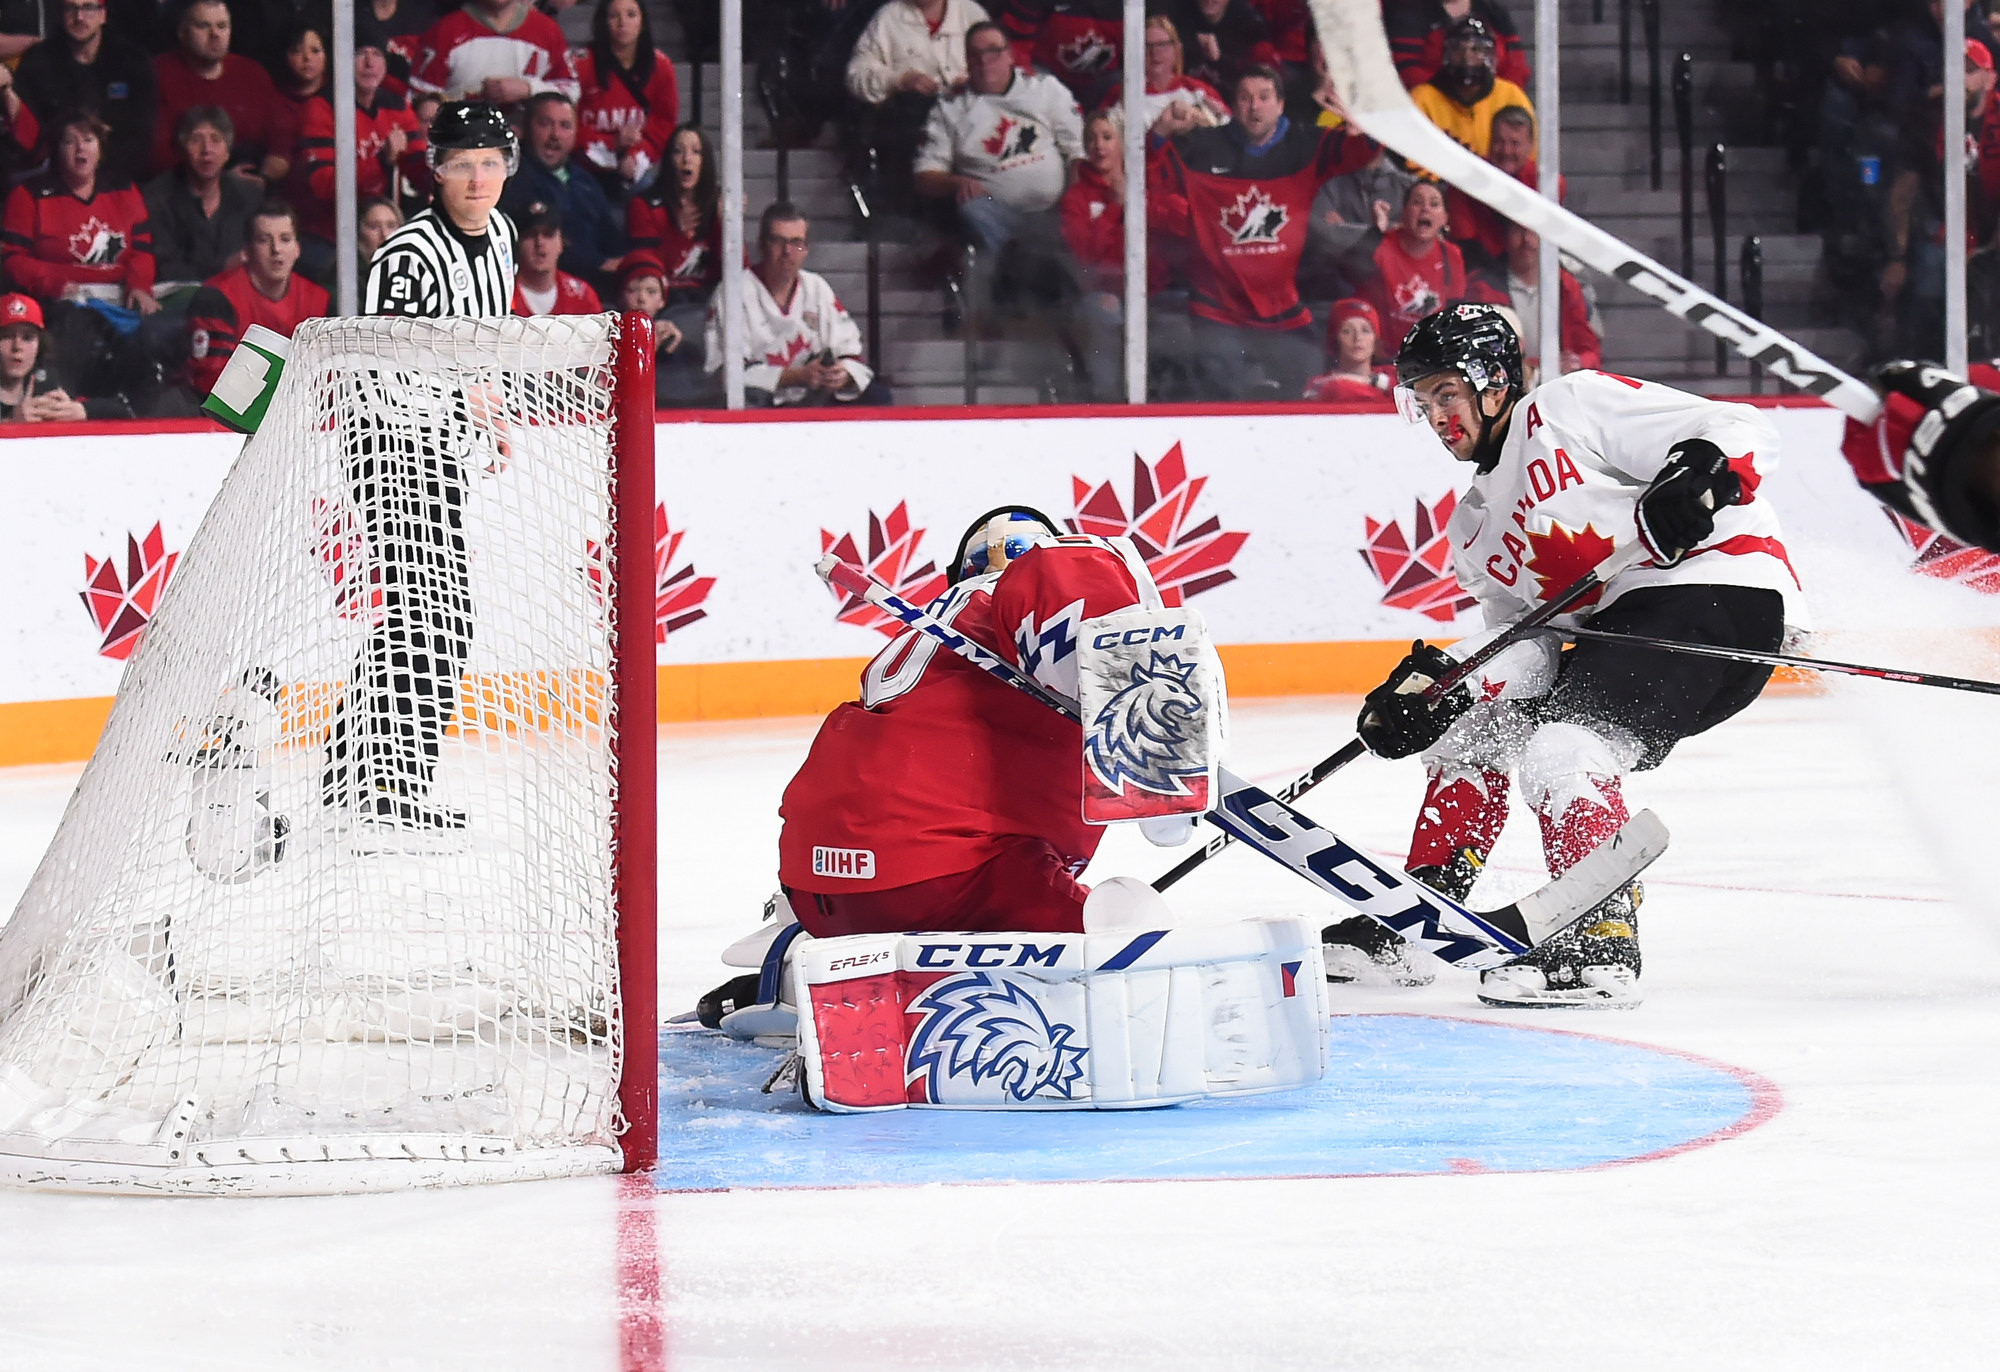 Guenther's golden goal lifts Canada past Czechia 3-2 in OT for 20th world  junior title - Aldergrove Star